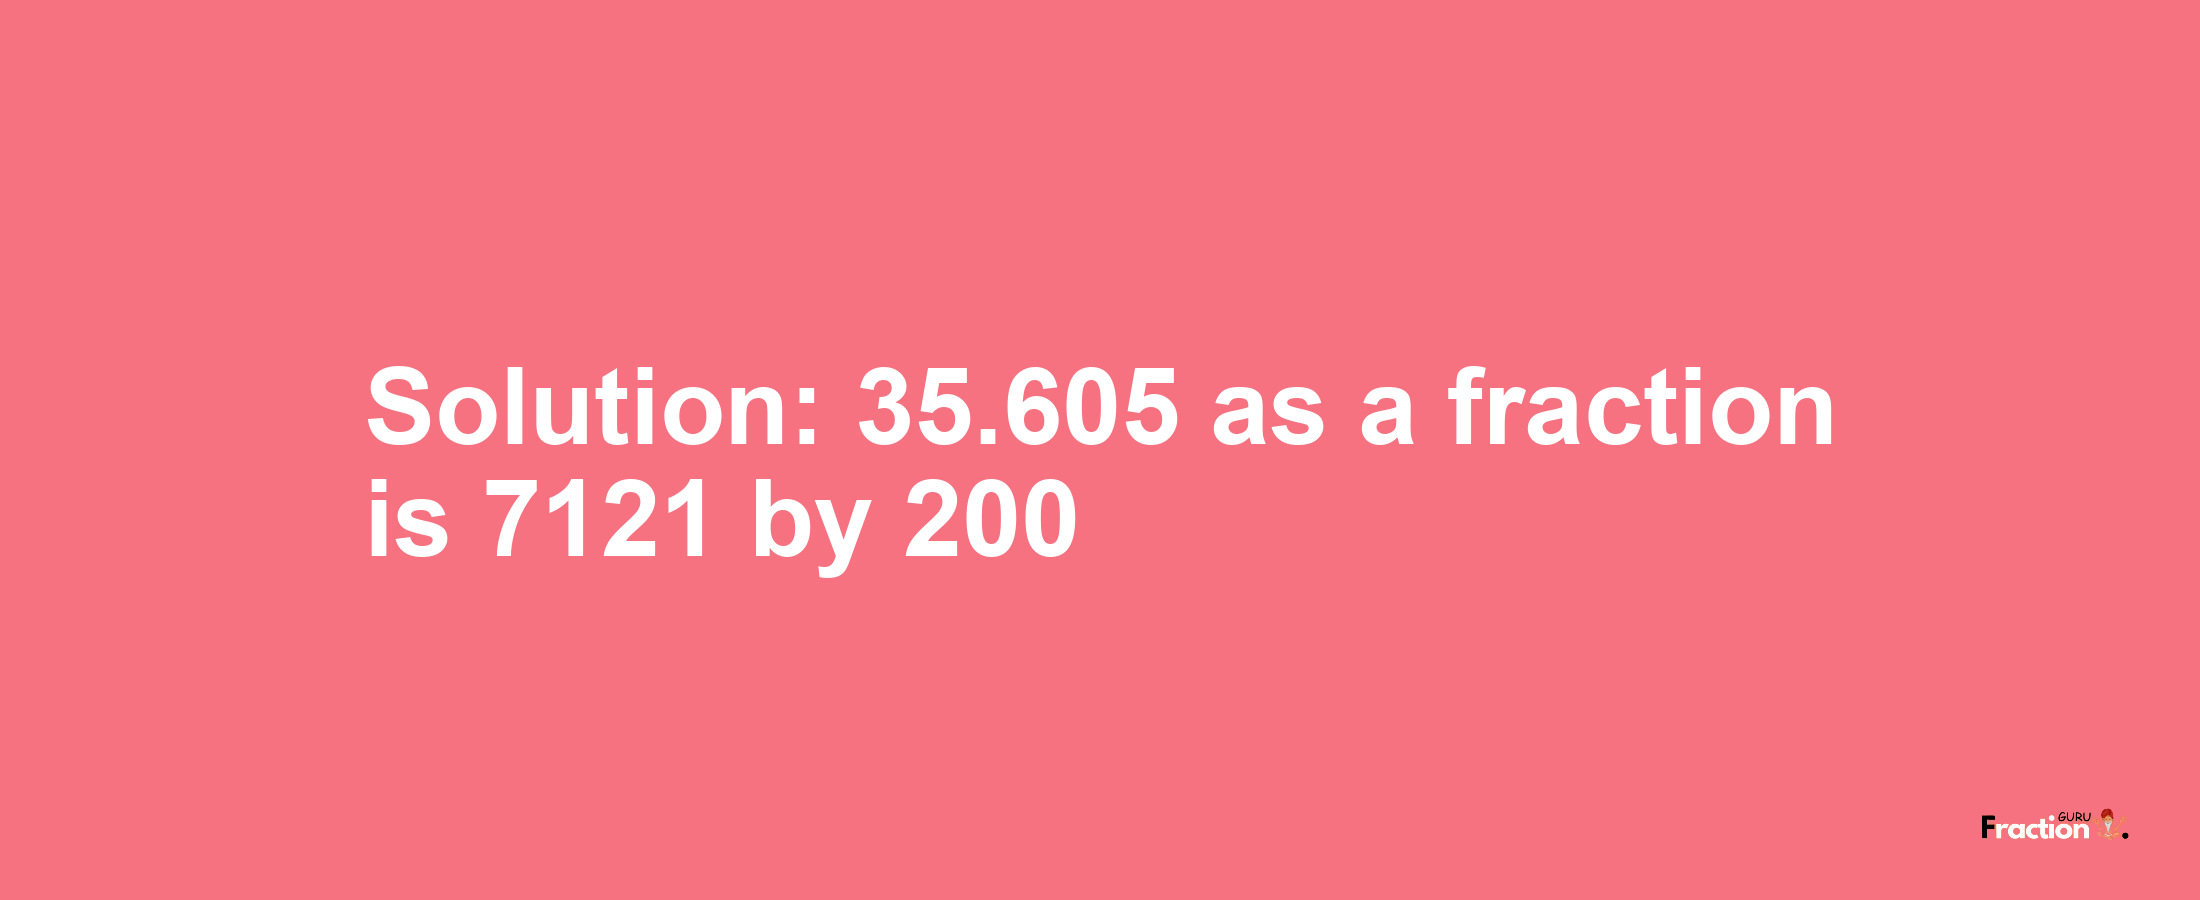 Solution:35.605 as a fraction is 7121/200